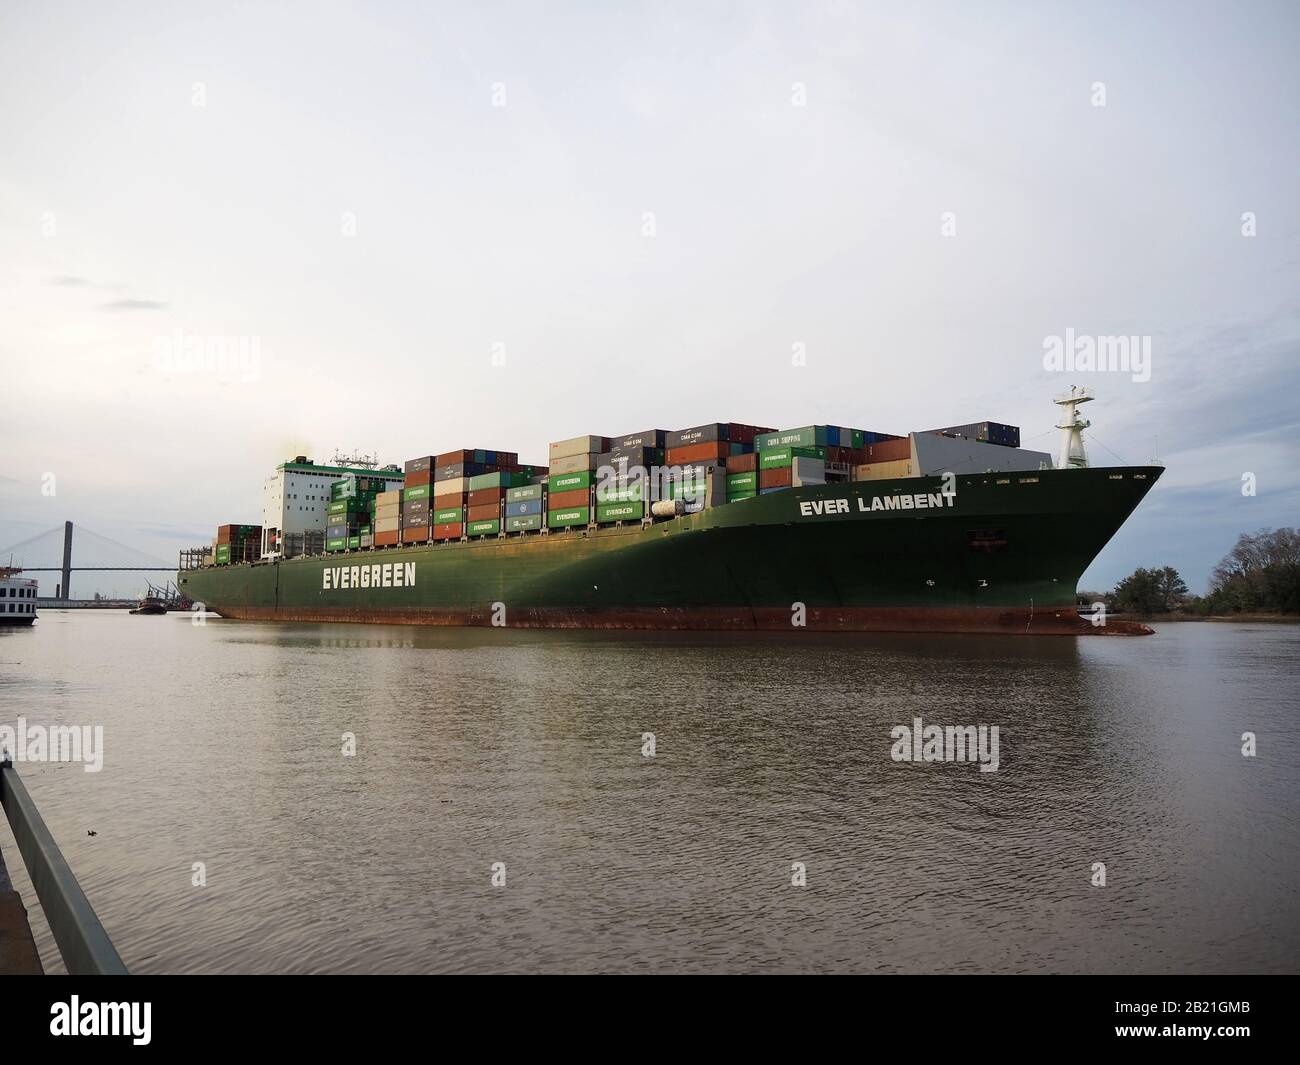 SAVANNAH, GA - FEBRUARY 23, 2020:  A very large cargo ship loaded with shipping containers, some labled China Shipping, exits the port of Savannah on Stock Photo